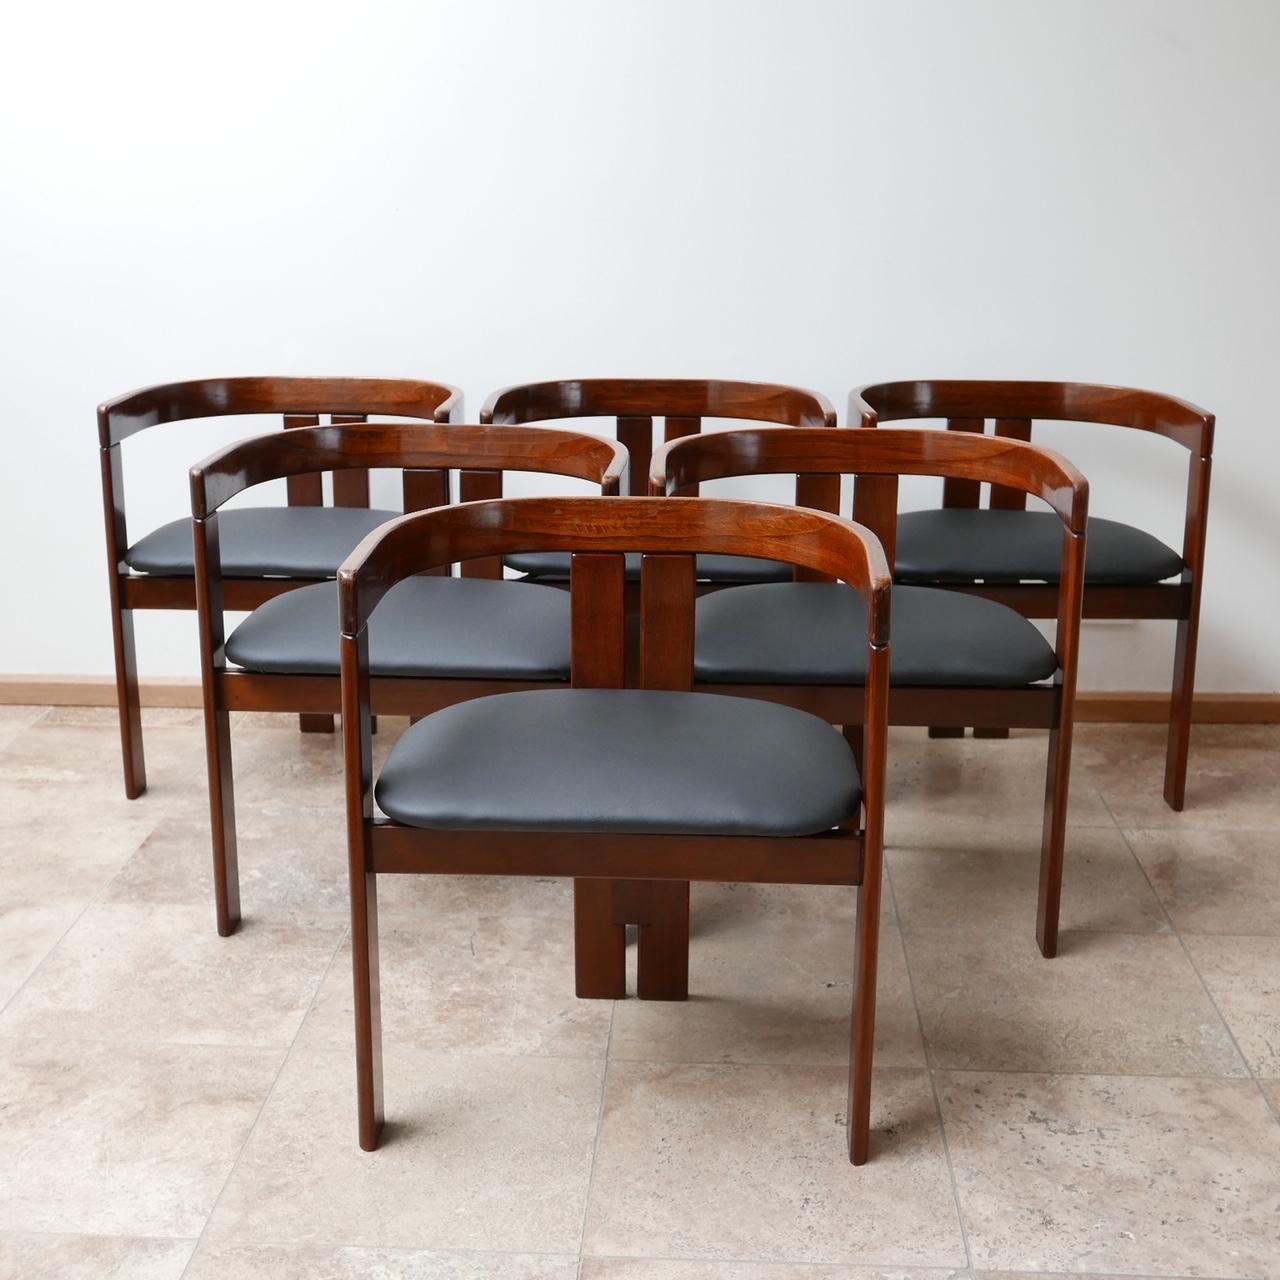 Mid-Century Modern 'Pigreco' Italian Midcentury Dining Chairs Attributed to Tobia Scarpa